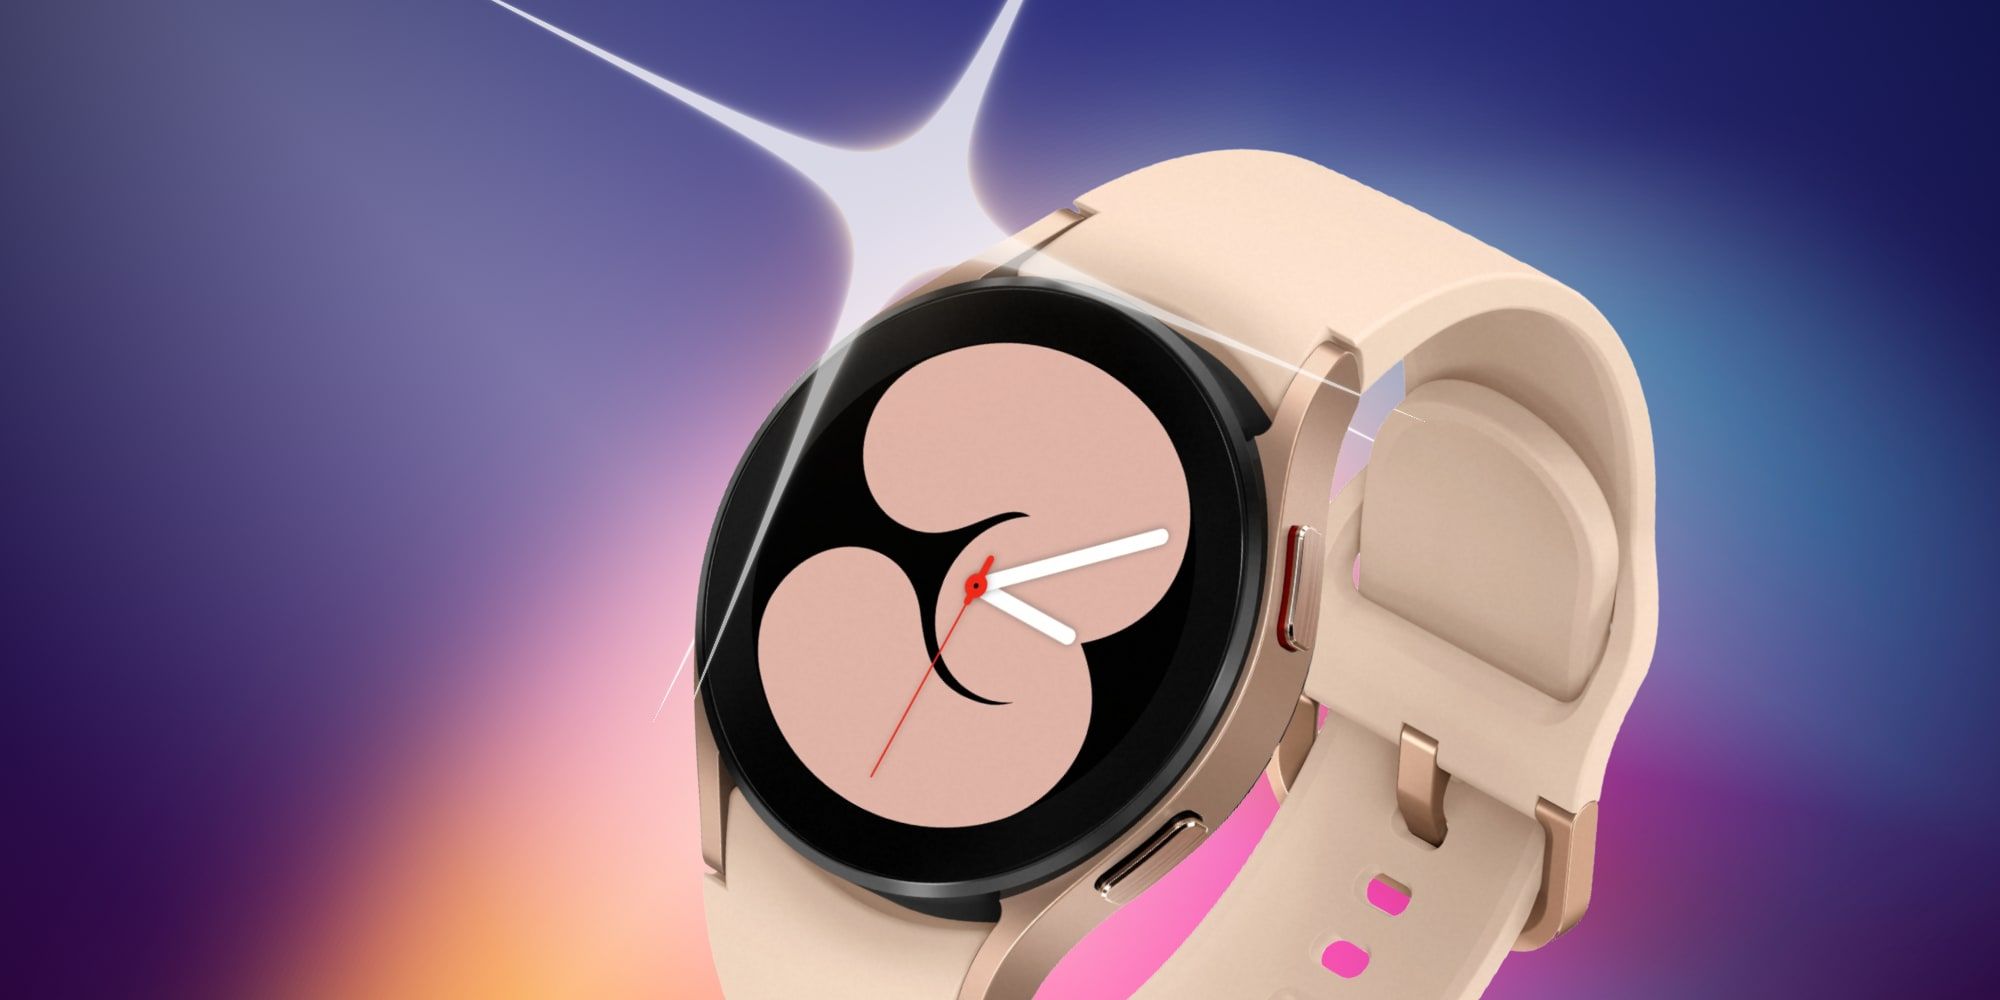 Samsung announces new Galaxy Watch 4, drops iOS support for new wearables |  Ars Technica